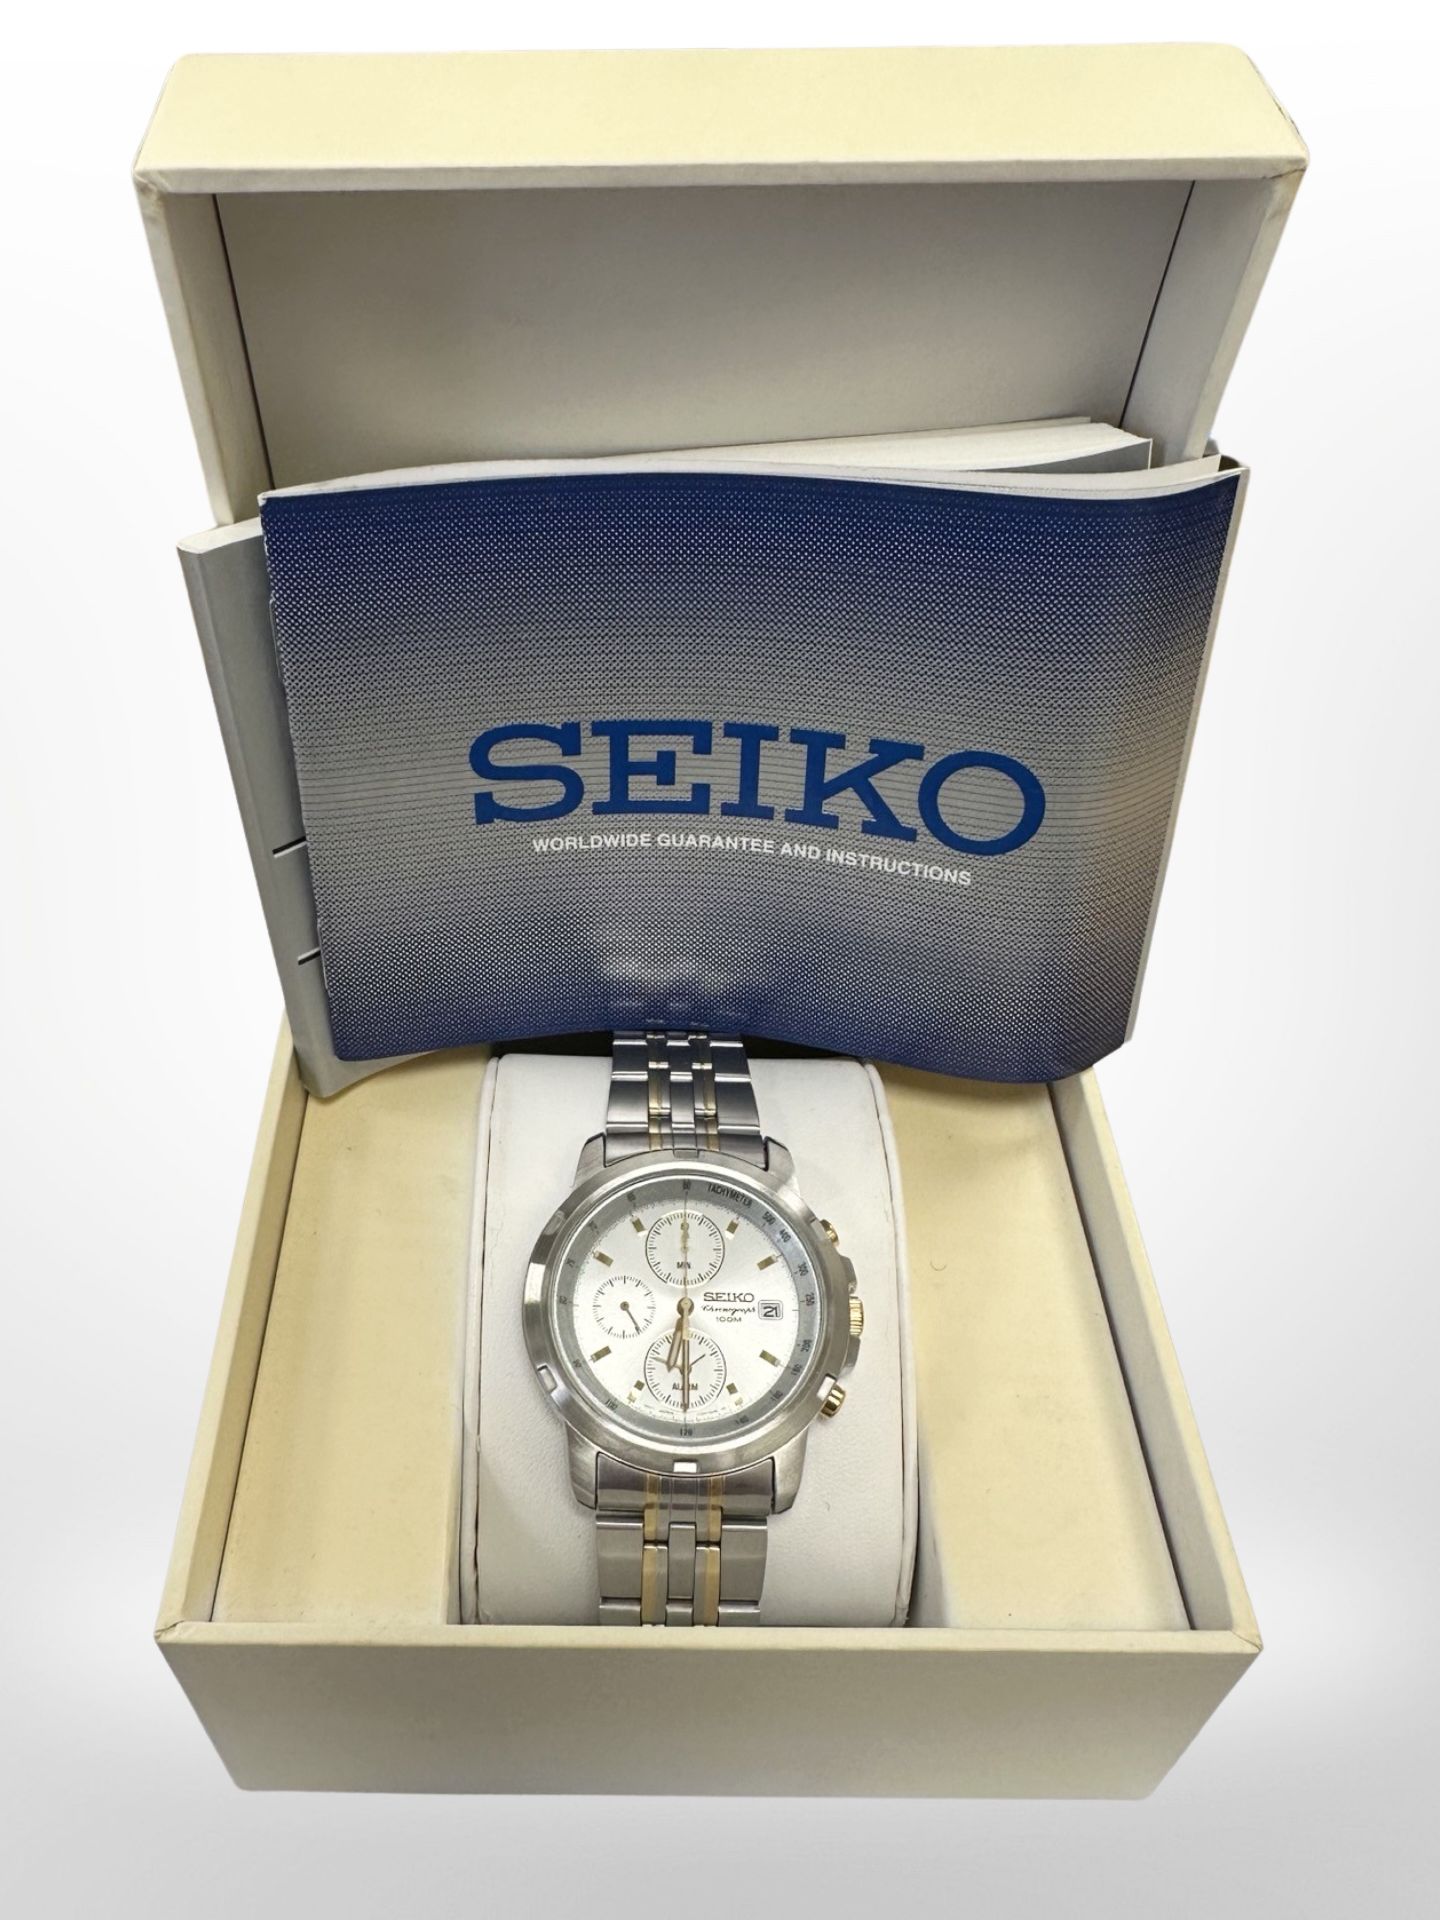 A Gent's Seiko stainless steel chronograph, boxed.